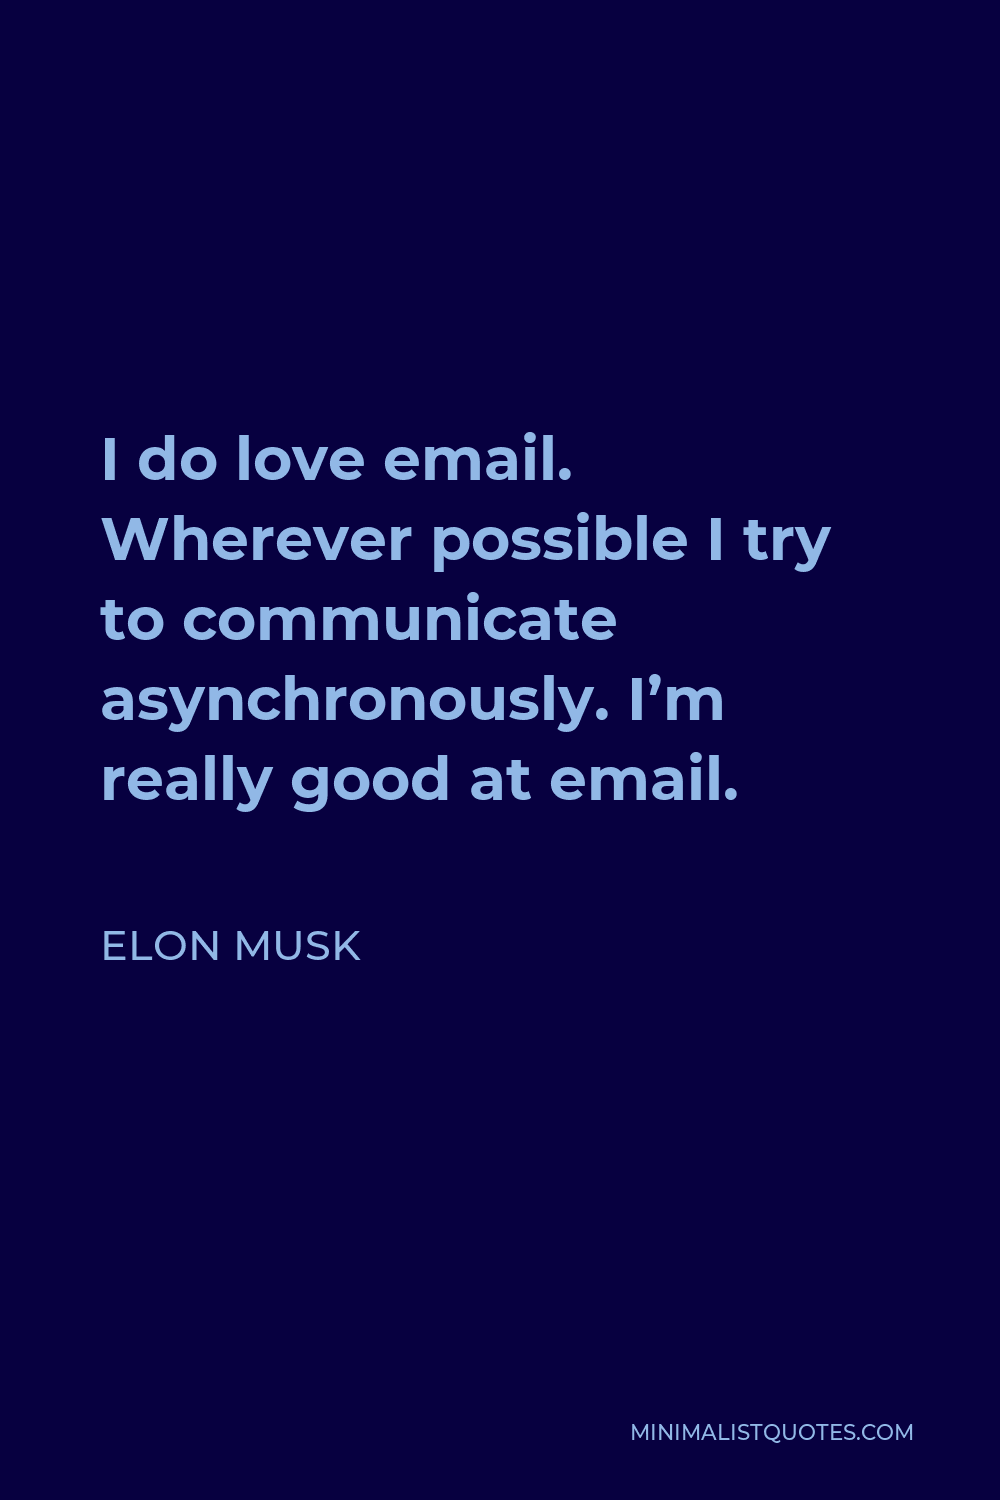 Elon Musk Quote - I do love email. Wherever possible I try to communicate asynchronously. I’m really good at email.